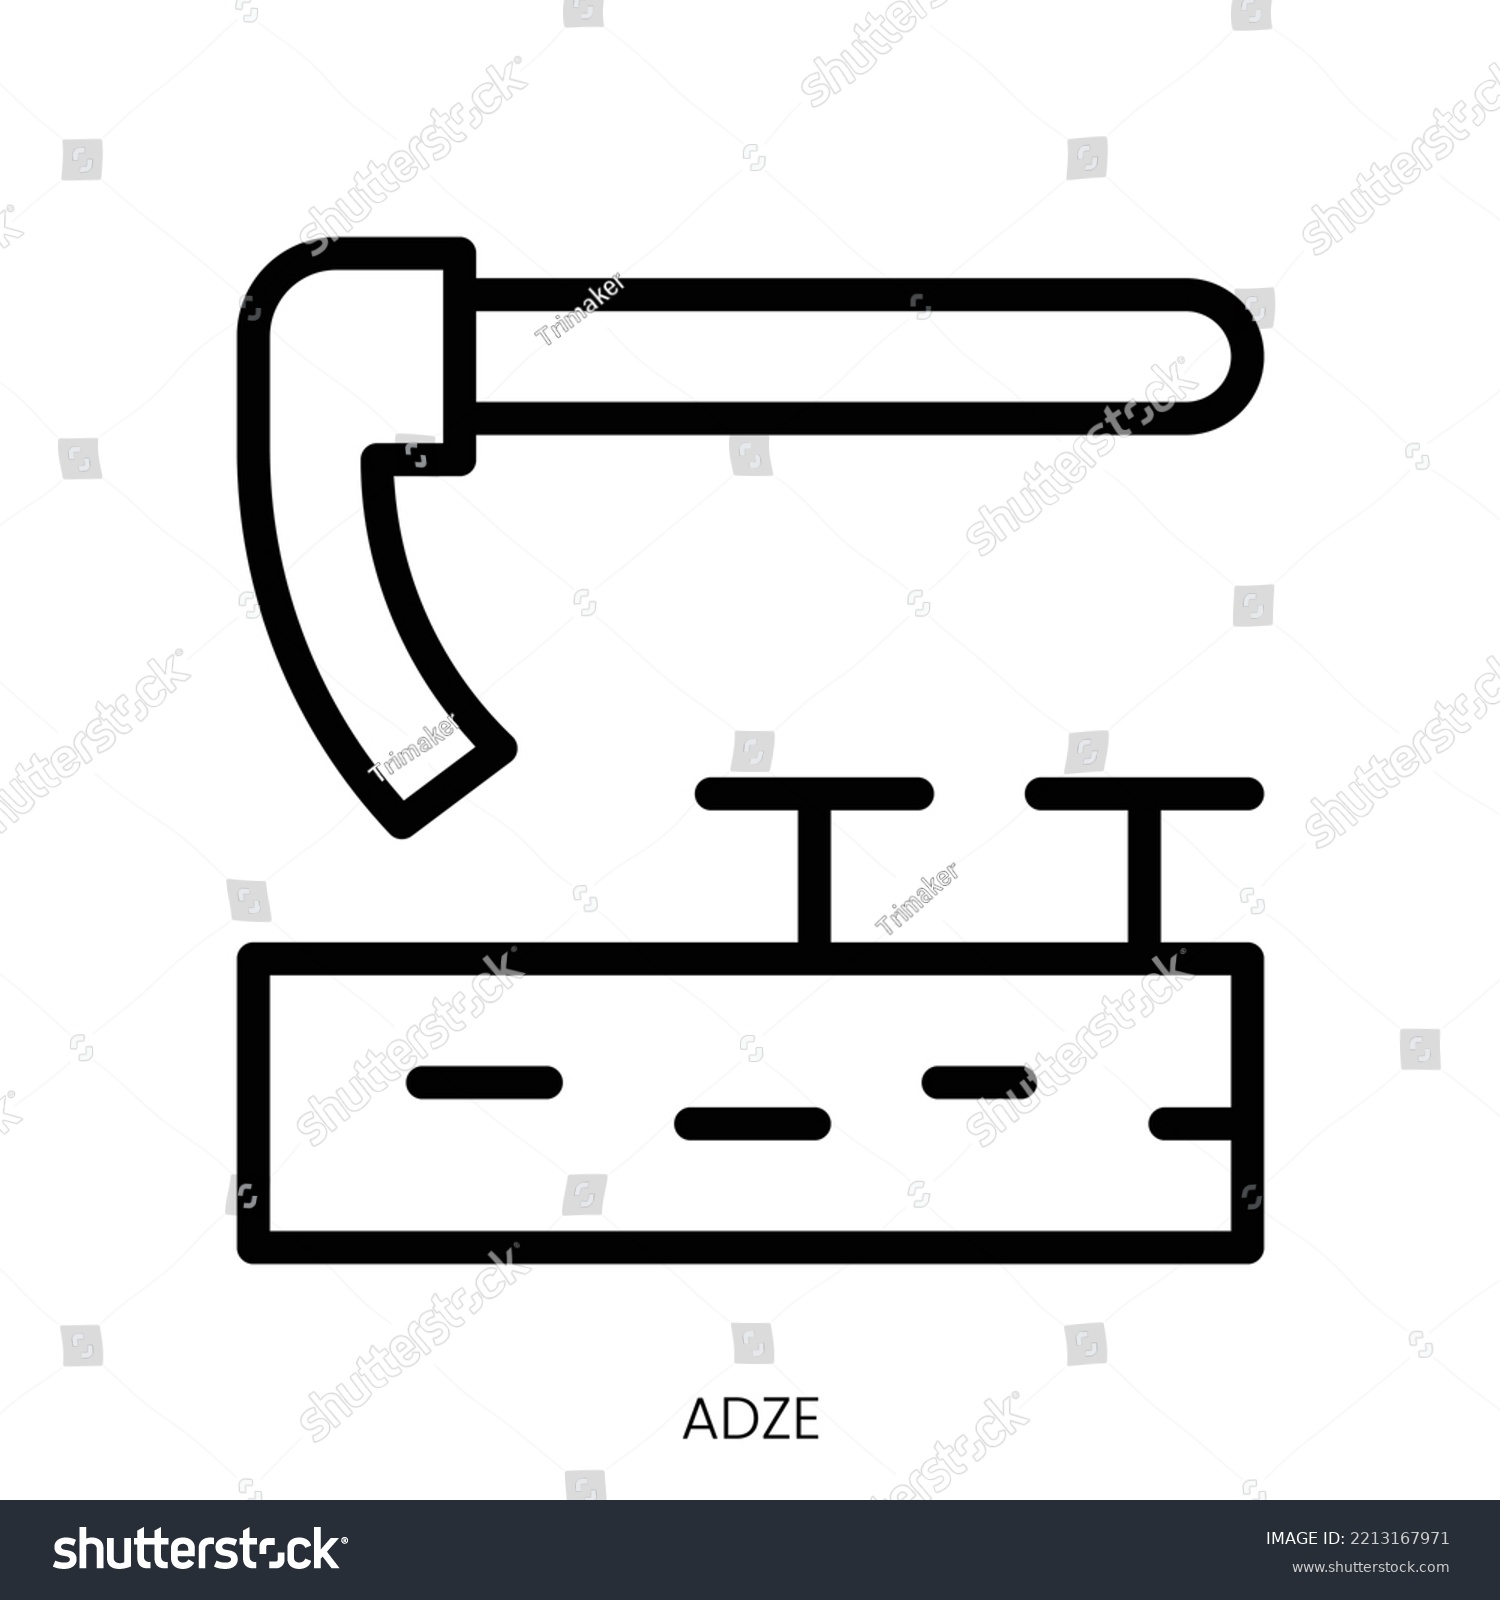 SVG of adze icon. Line Art Style Design Isolated On White Background svg